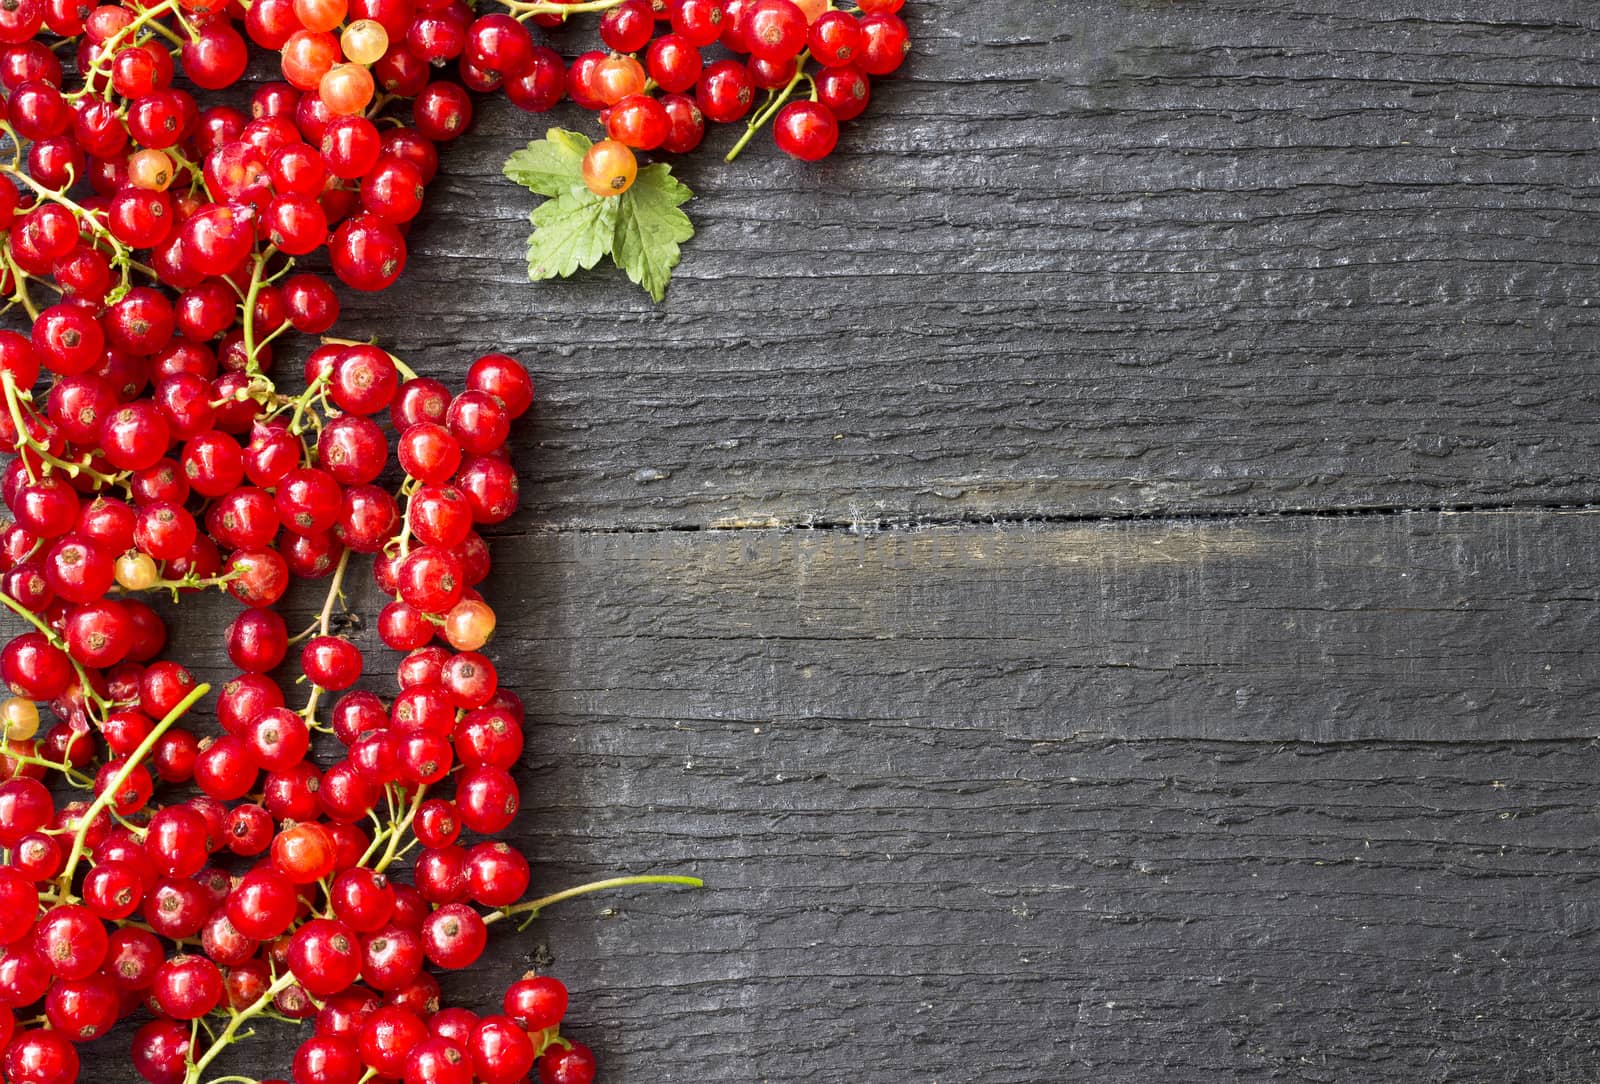 Freshly picked red currants on a wooden table